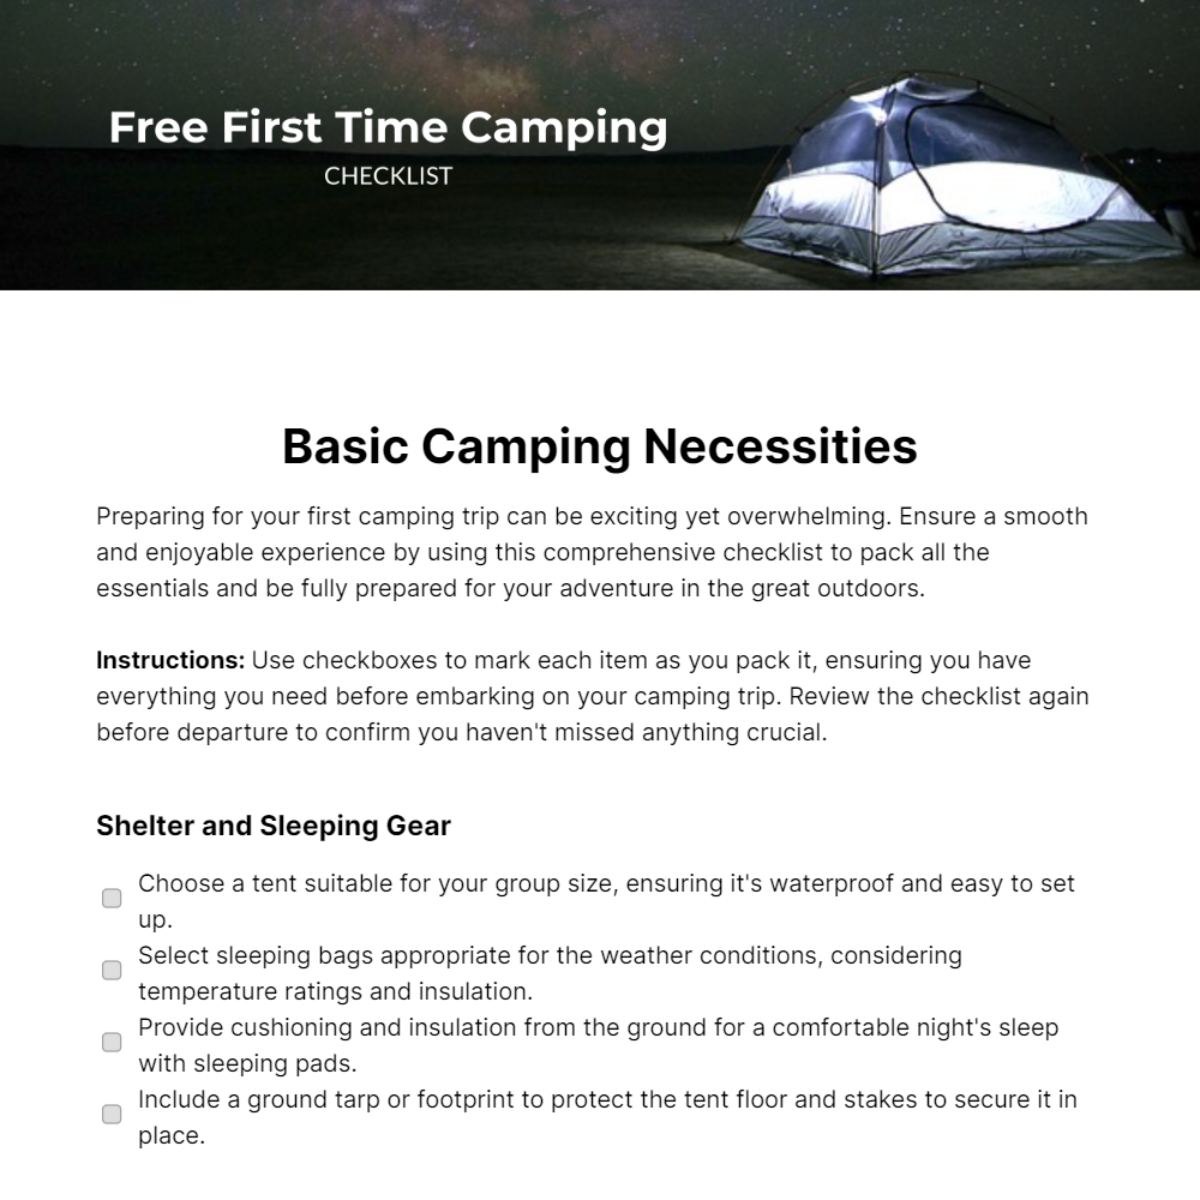 First Time Camping Checklist Template